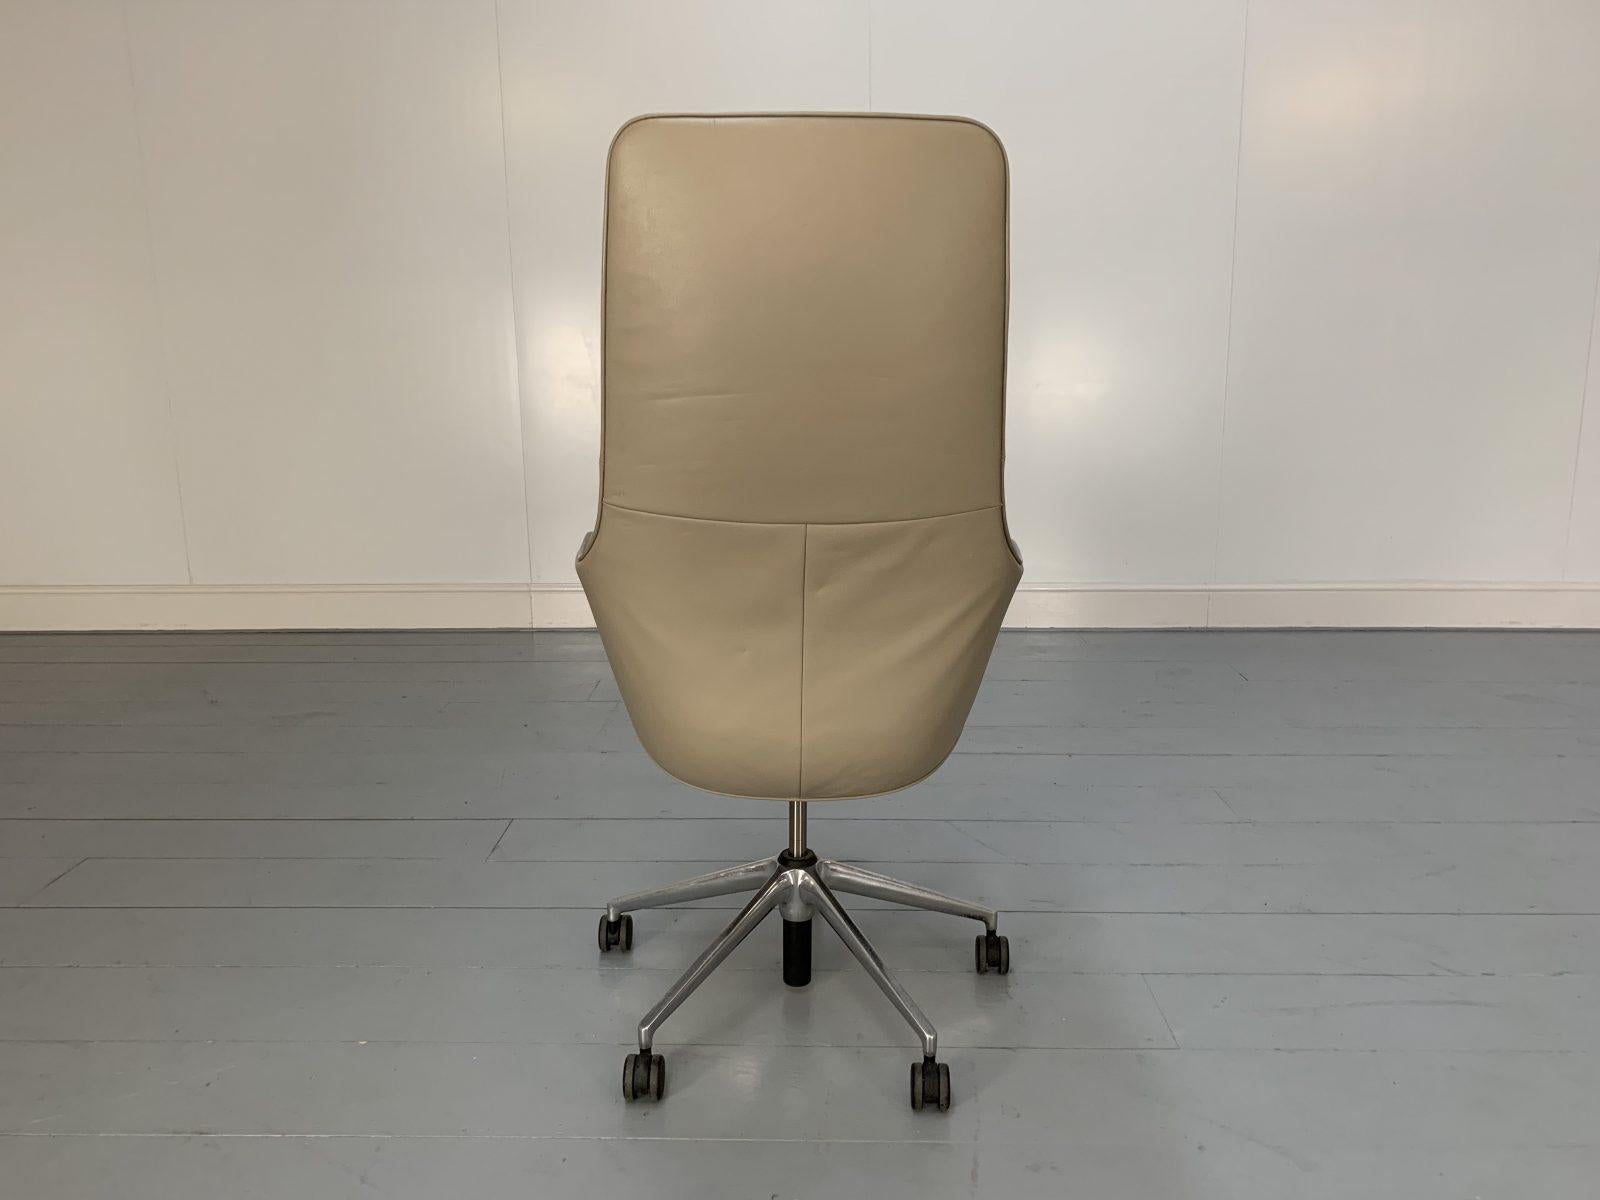 Contemporary Vitra “Grand Executive” Office Armchair Chair in “Premium” Sand Leather